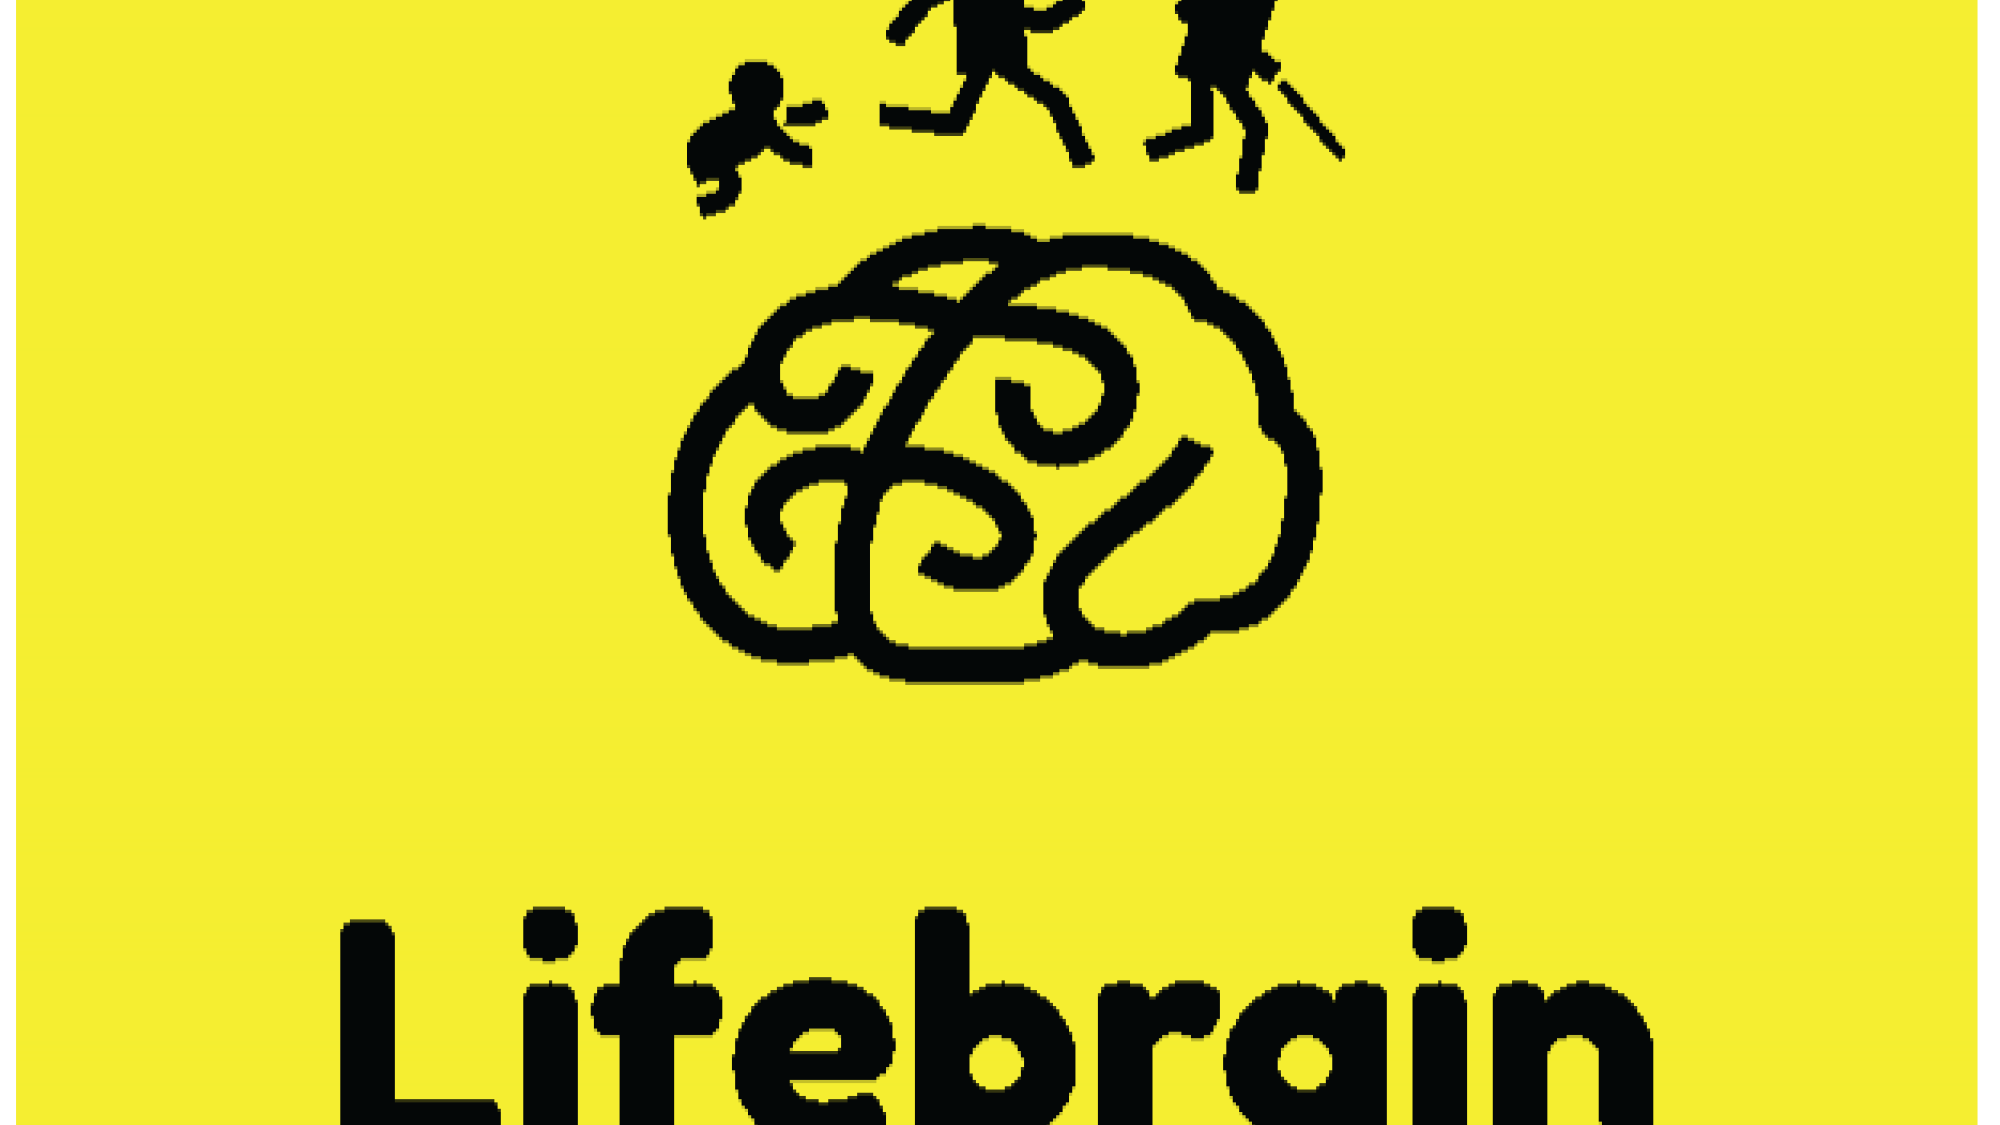 lifebrain-vitas-eu-projects.png – Vitas Analytical Services